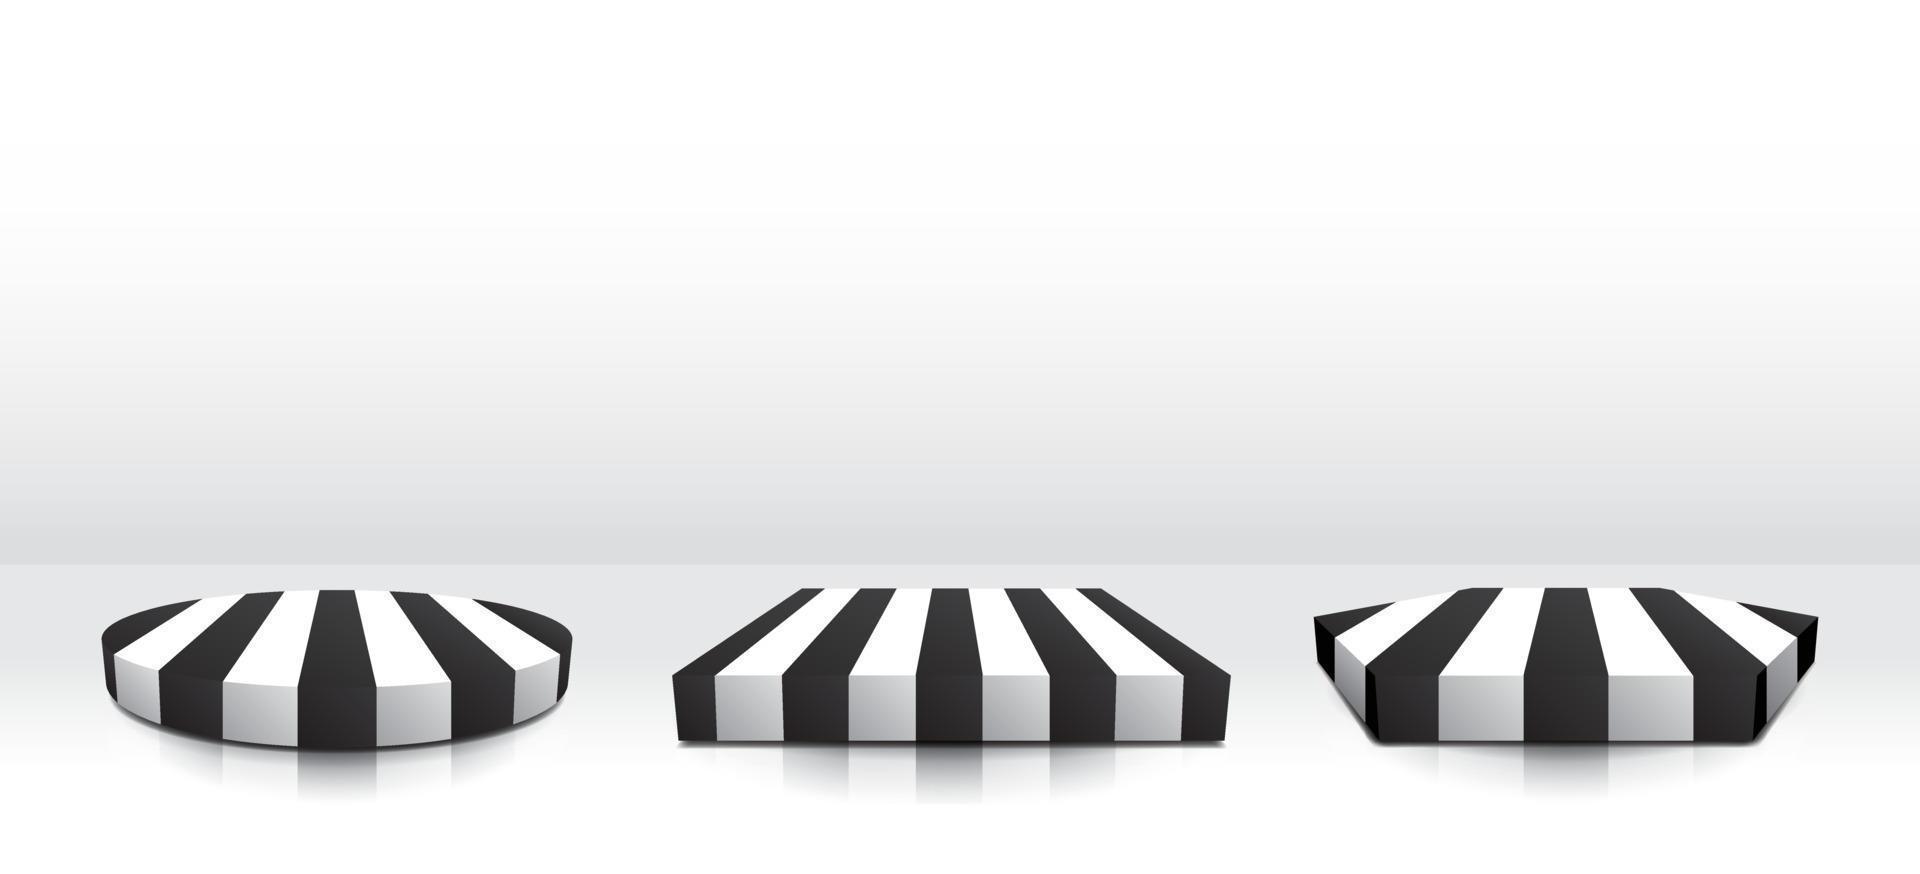 Black and white striped stage display 3D illustration vector for fashion model or fashion product.